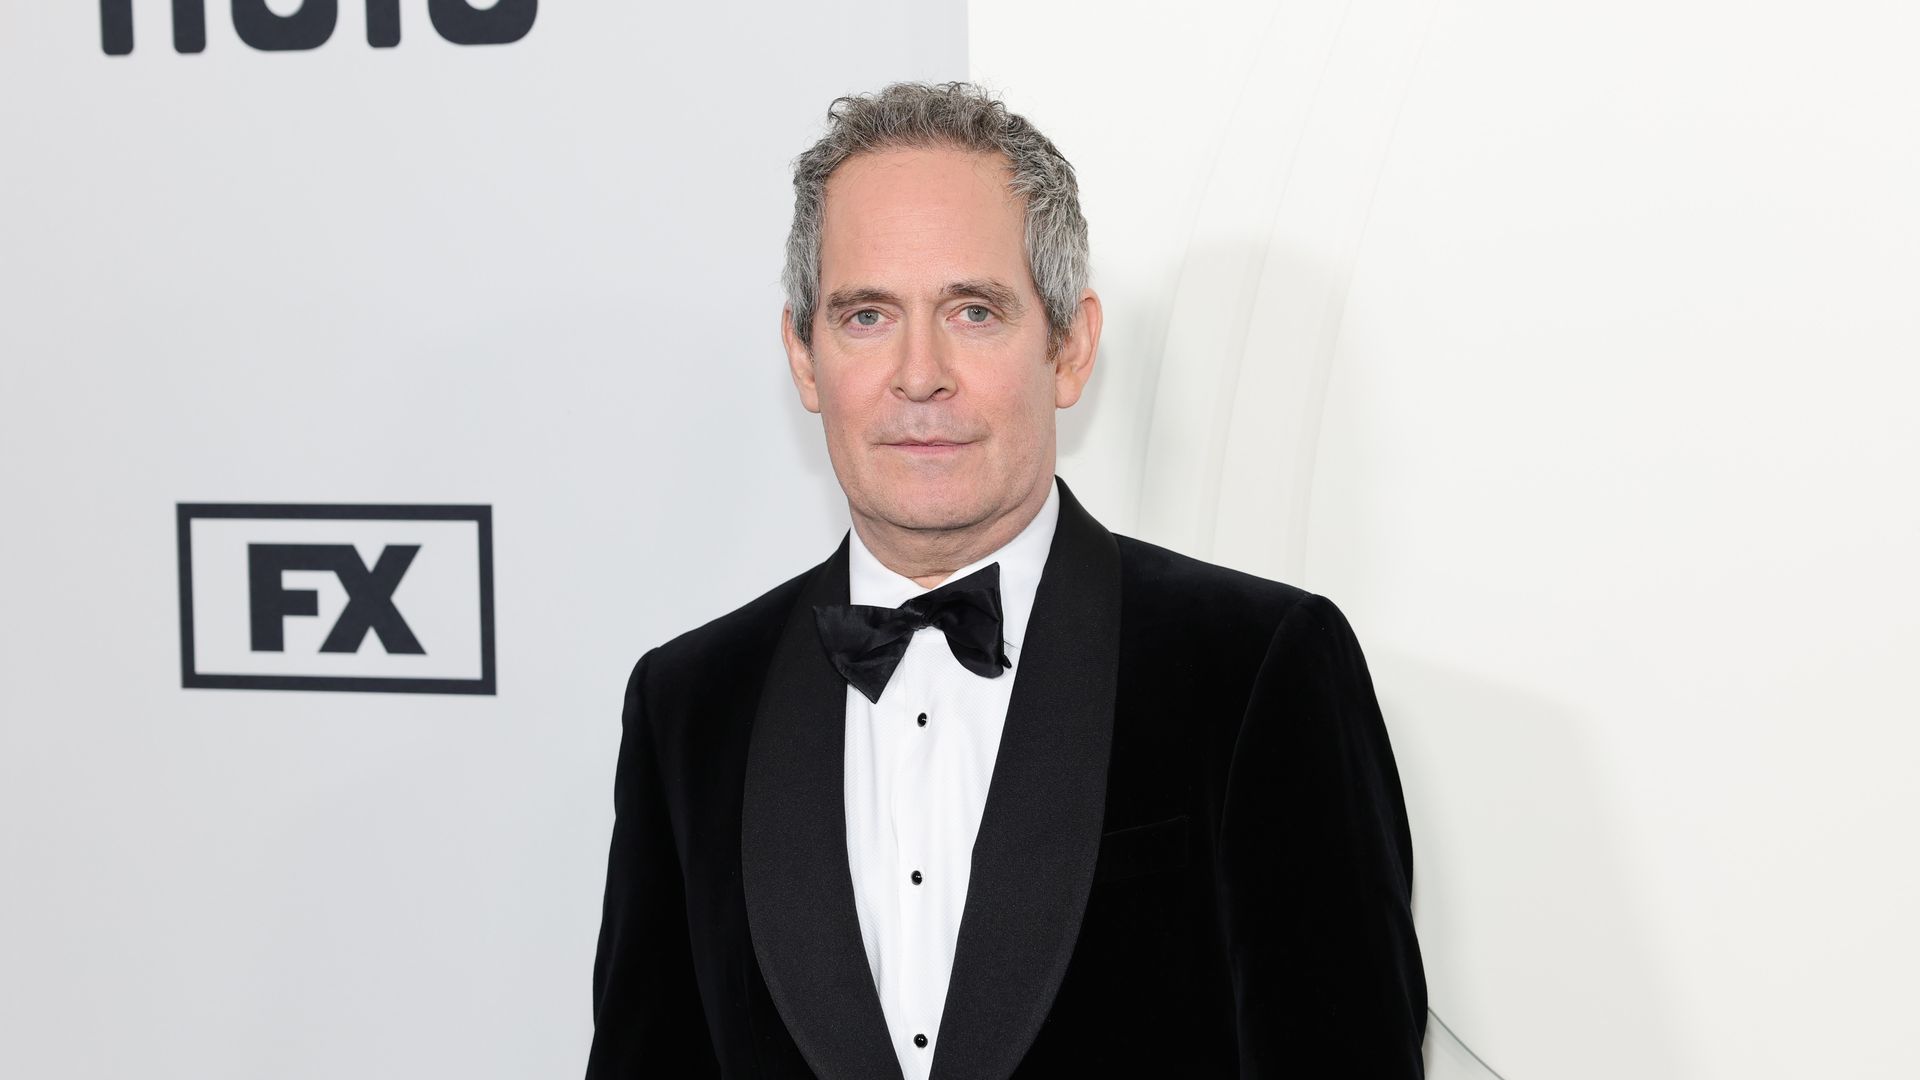 Everything you need to know about Tom Hollander, the actor who received Tom Holland’s paycheck